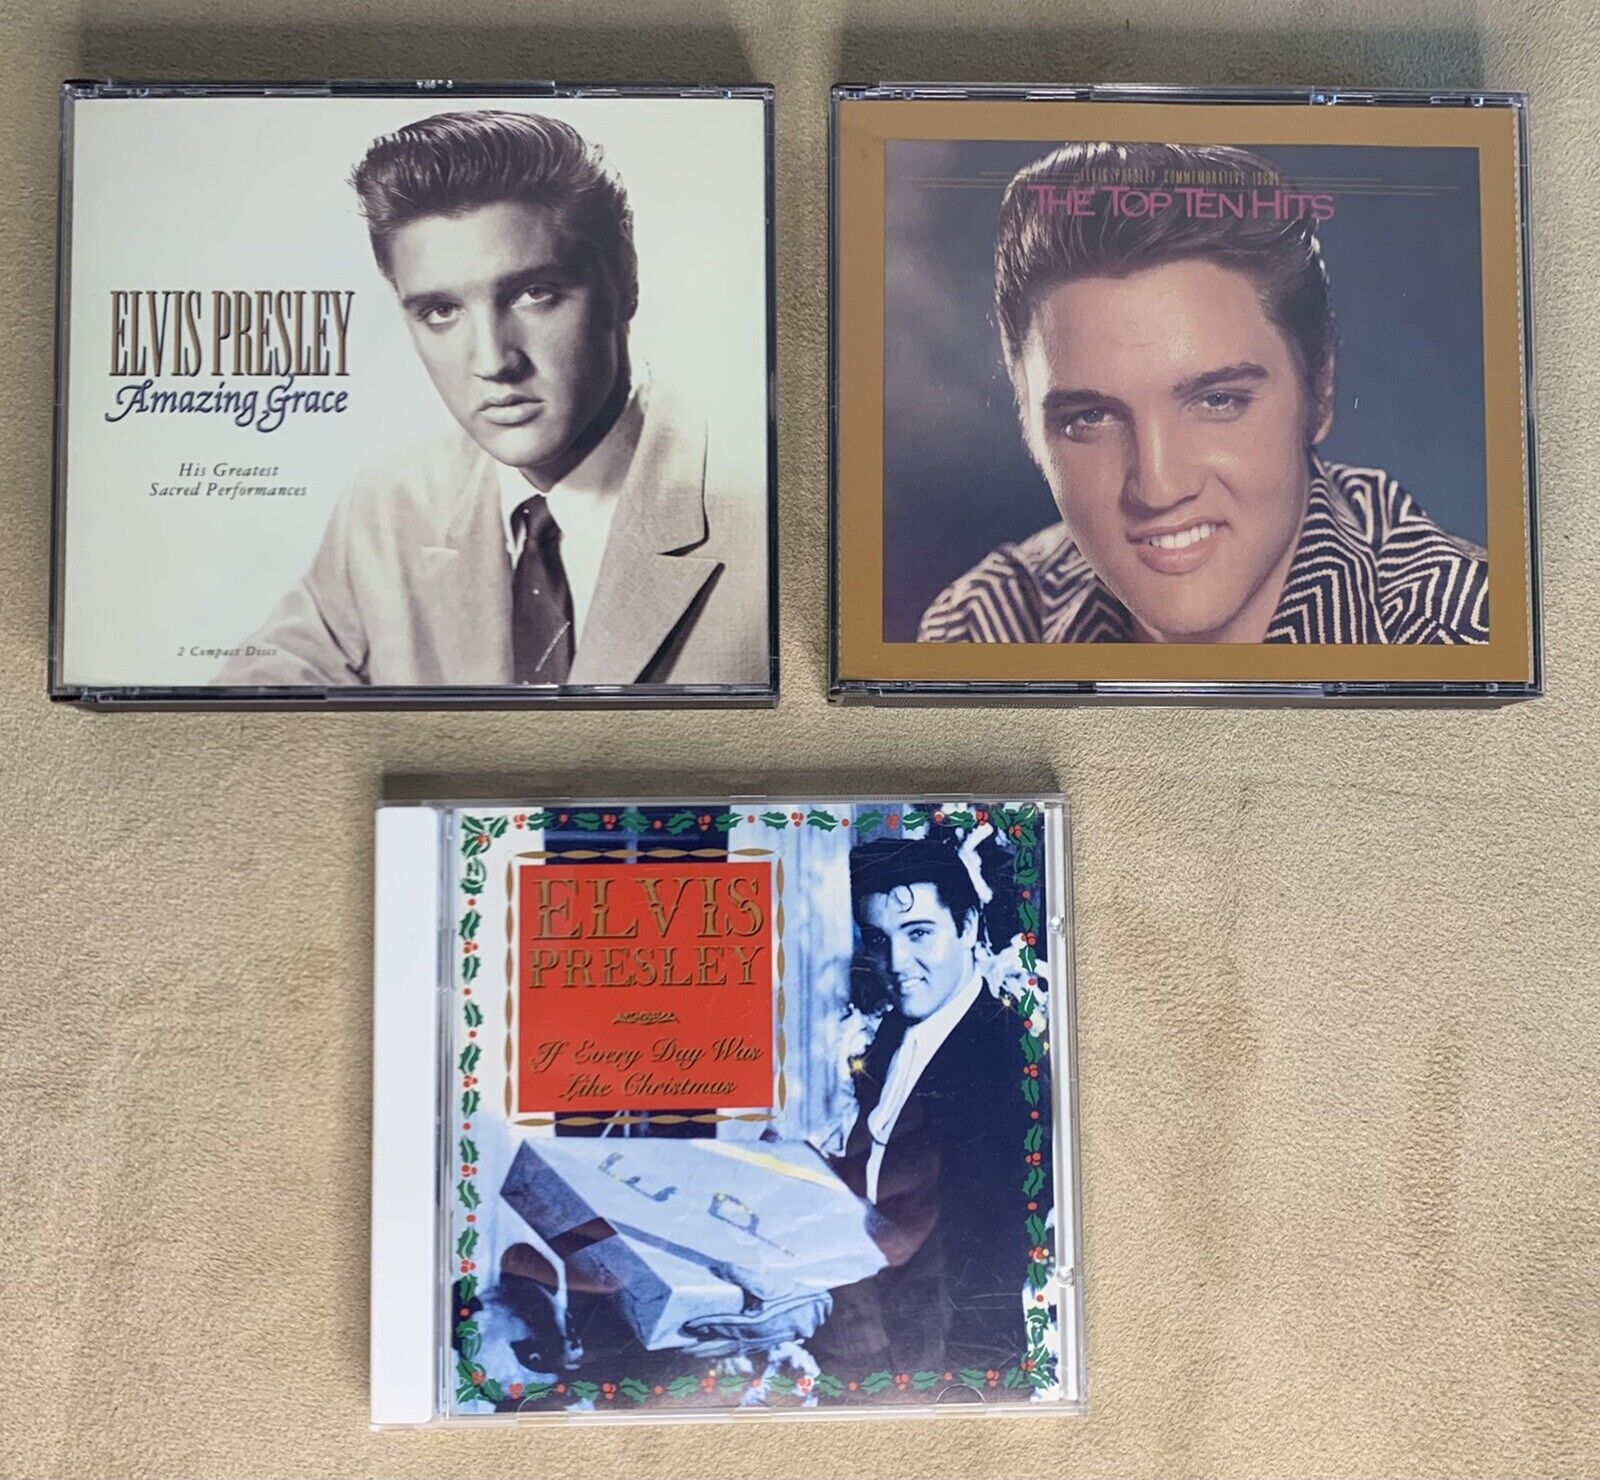 Elvis Presley Lot of 3 CDs (two of which are 2-disc Sets) - Amazing Grace..More